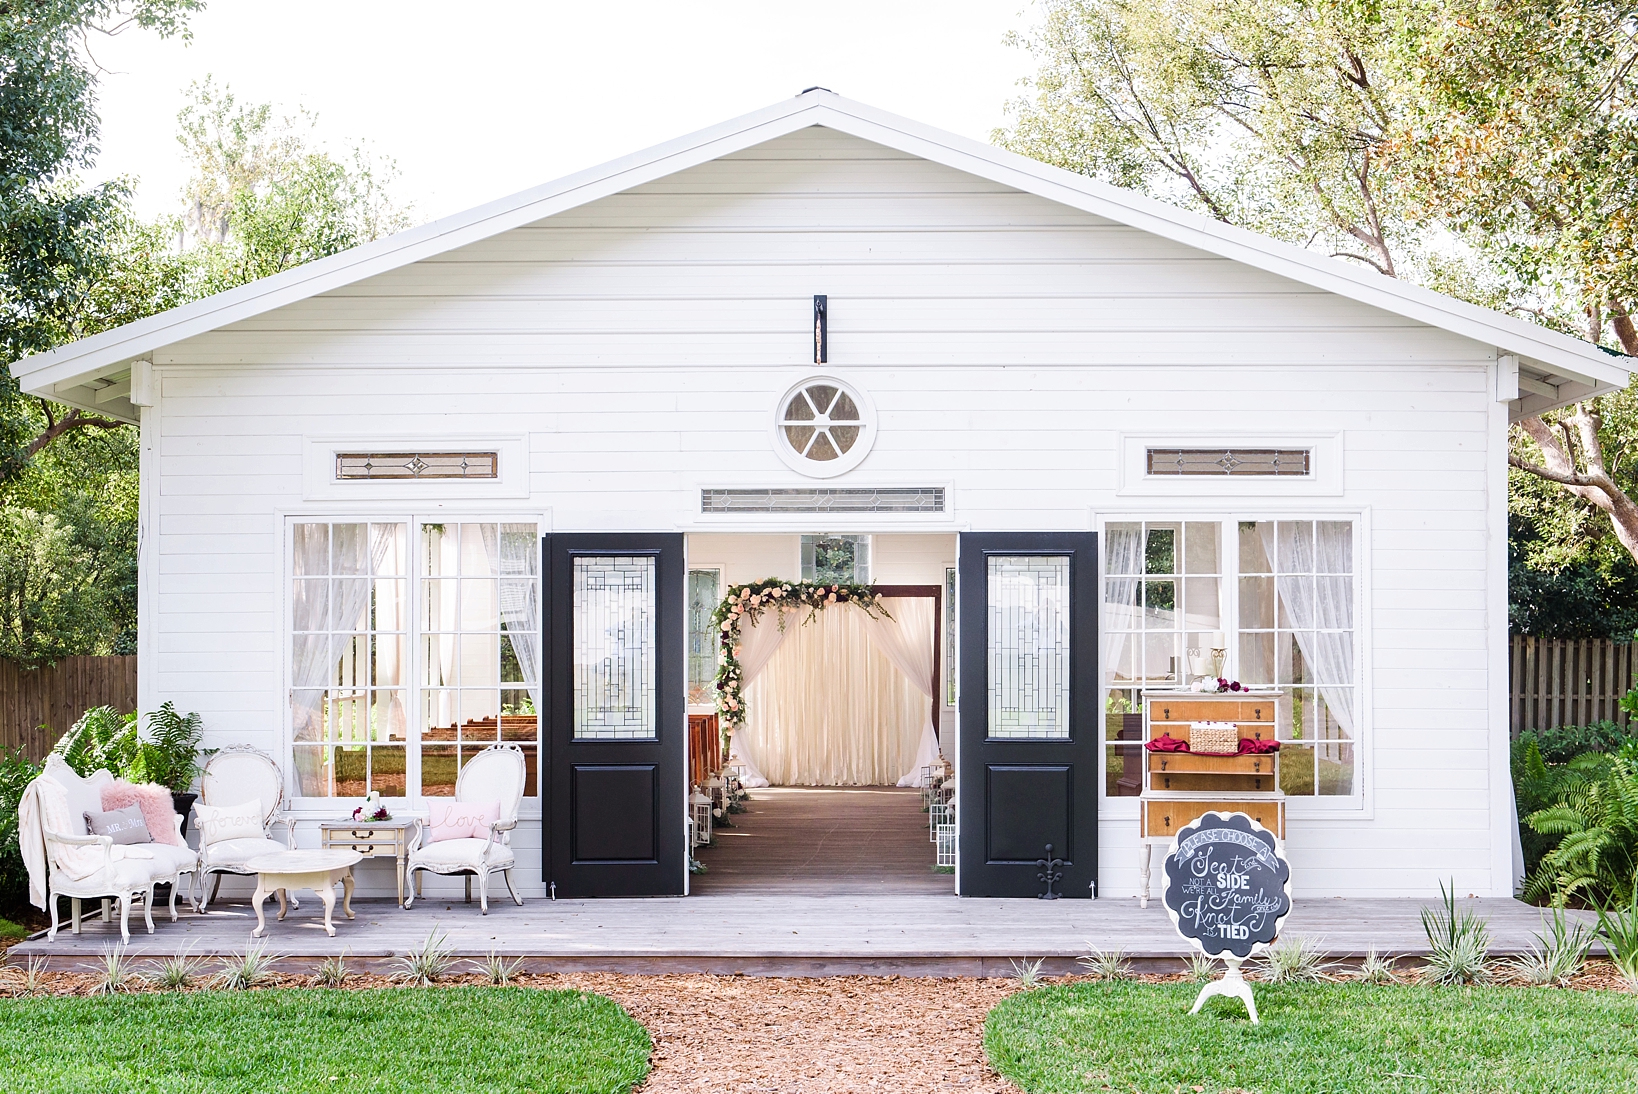 The open air chapel at Cross Creek Ranch with wedding arch through the front door